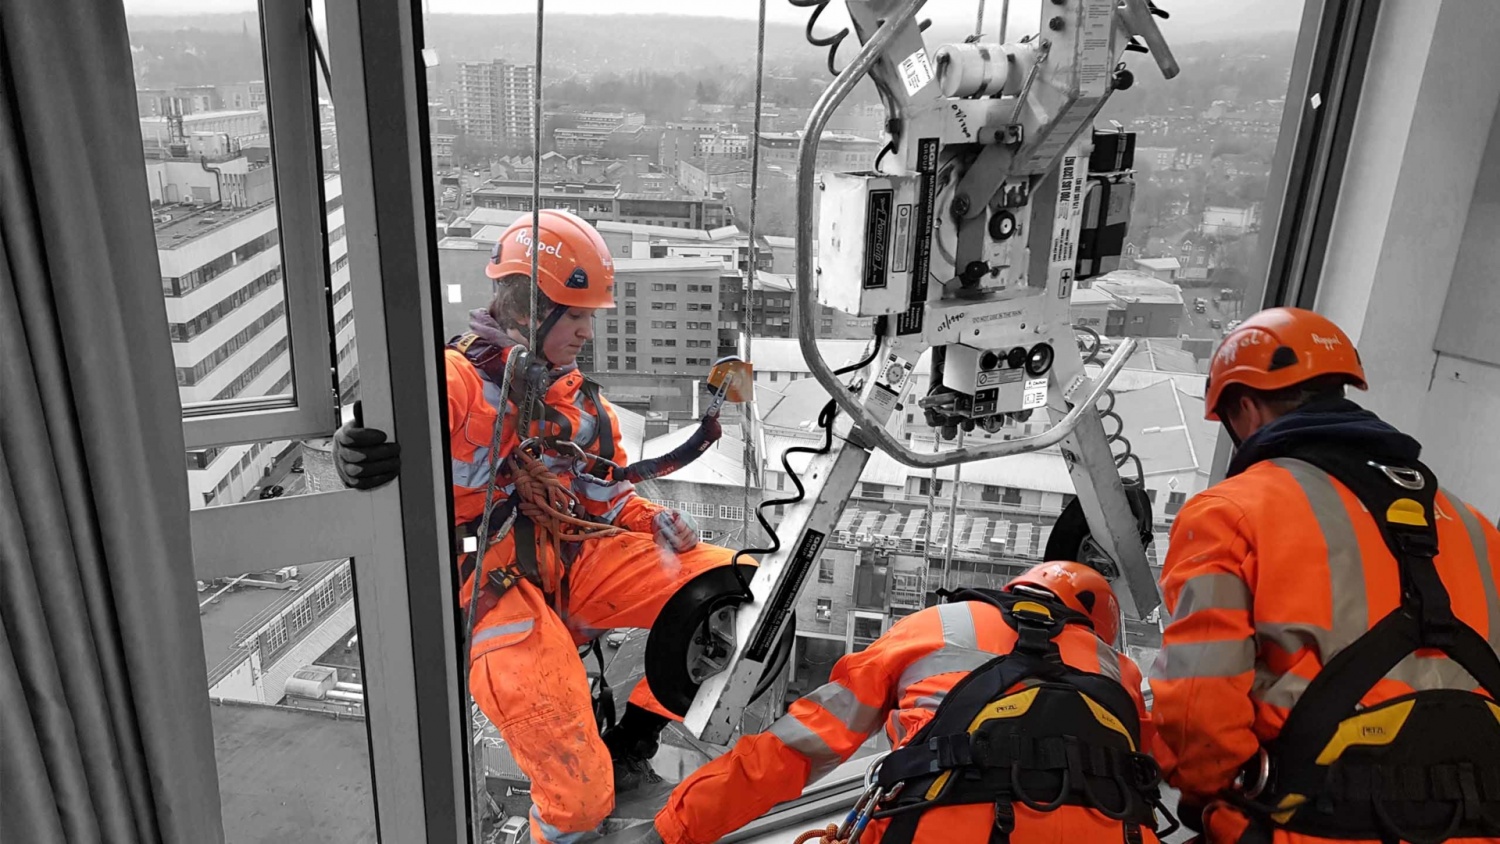 Rappel_Rope_Access_Cladding_Glazing_Services-1920x1080.jpeg